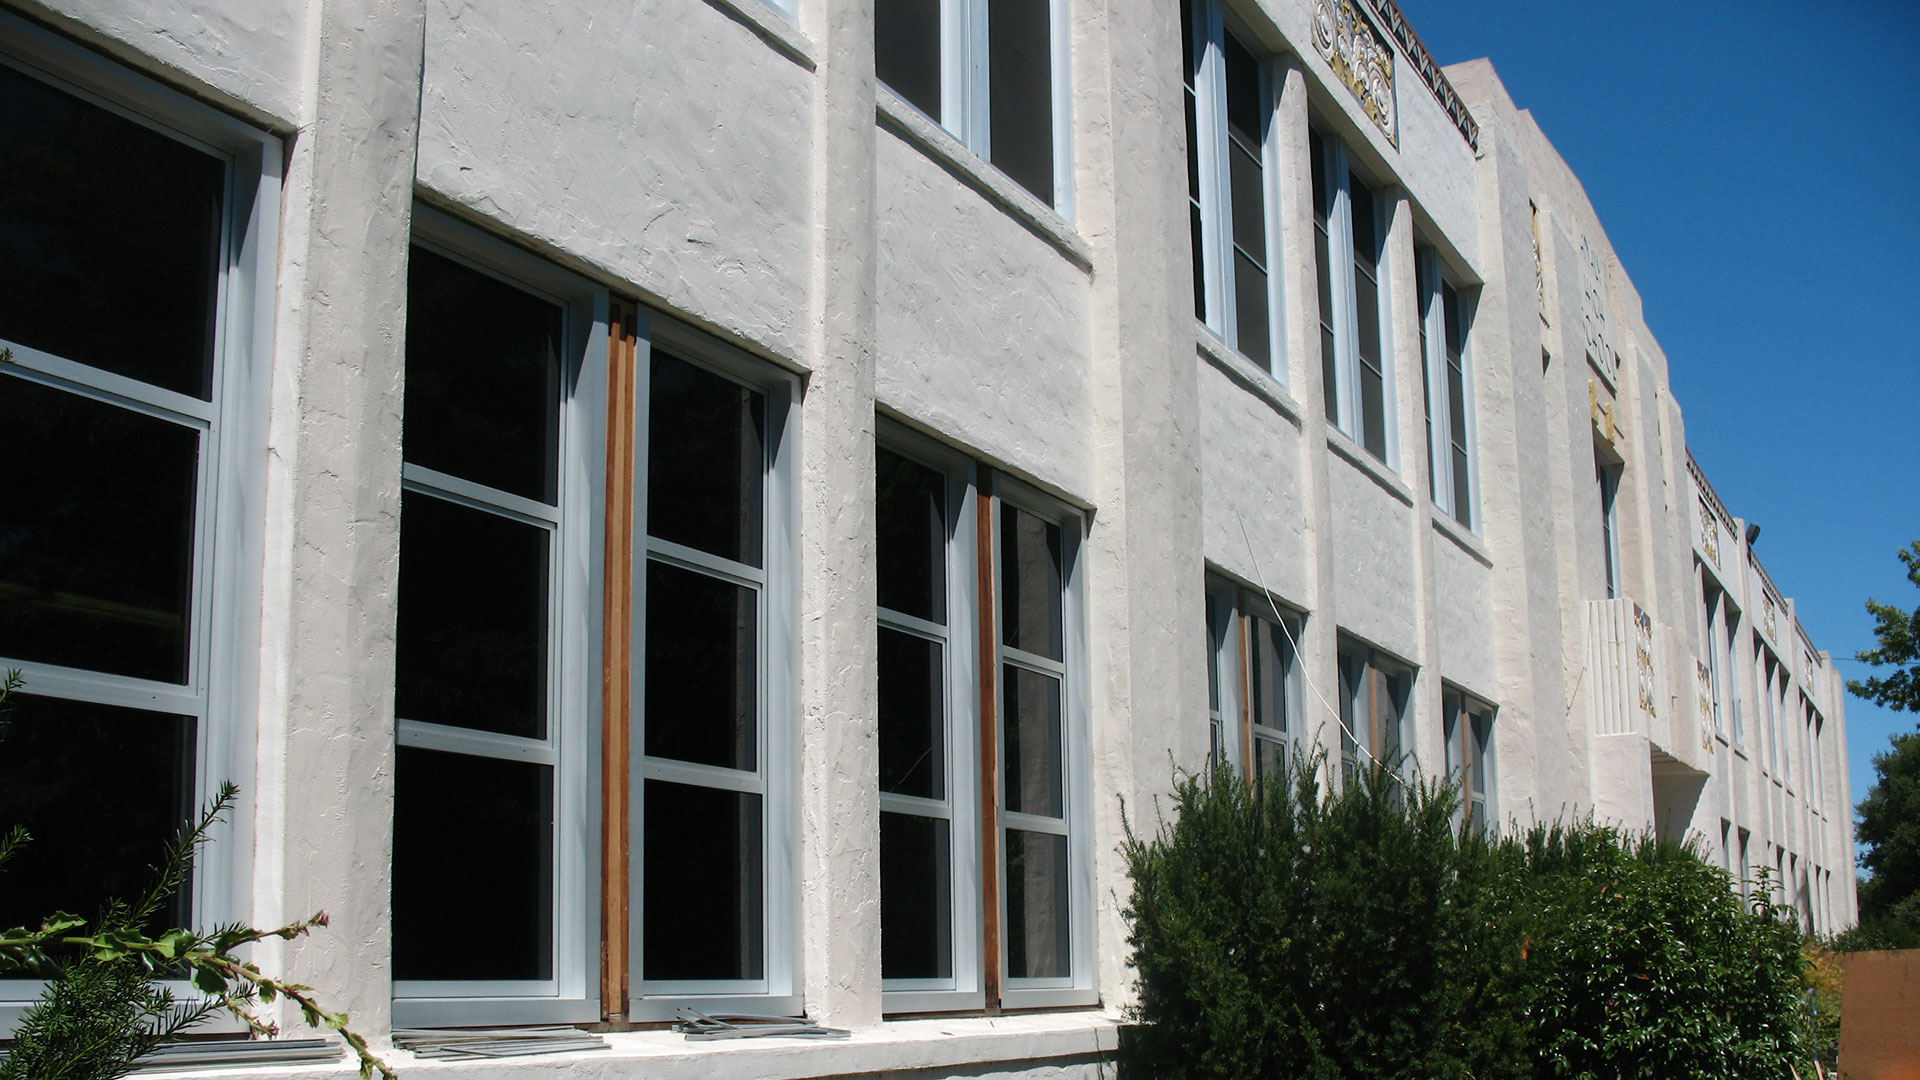 Concrete school building with two stories of large windows, with some windows blocked out.